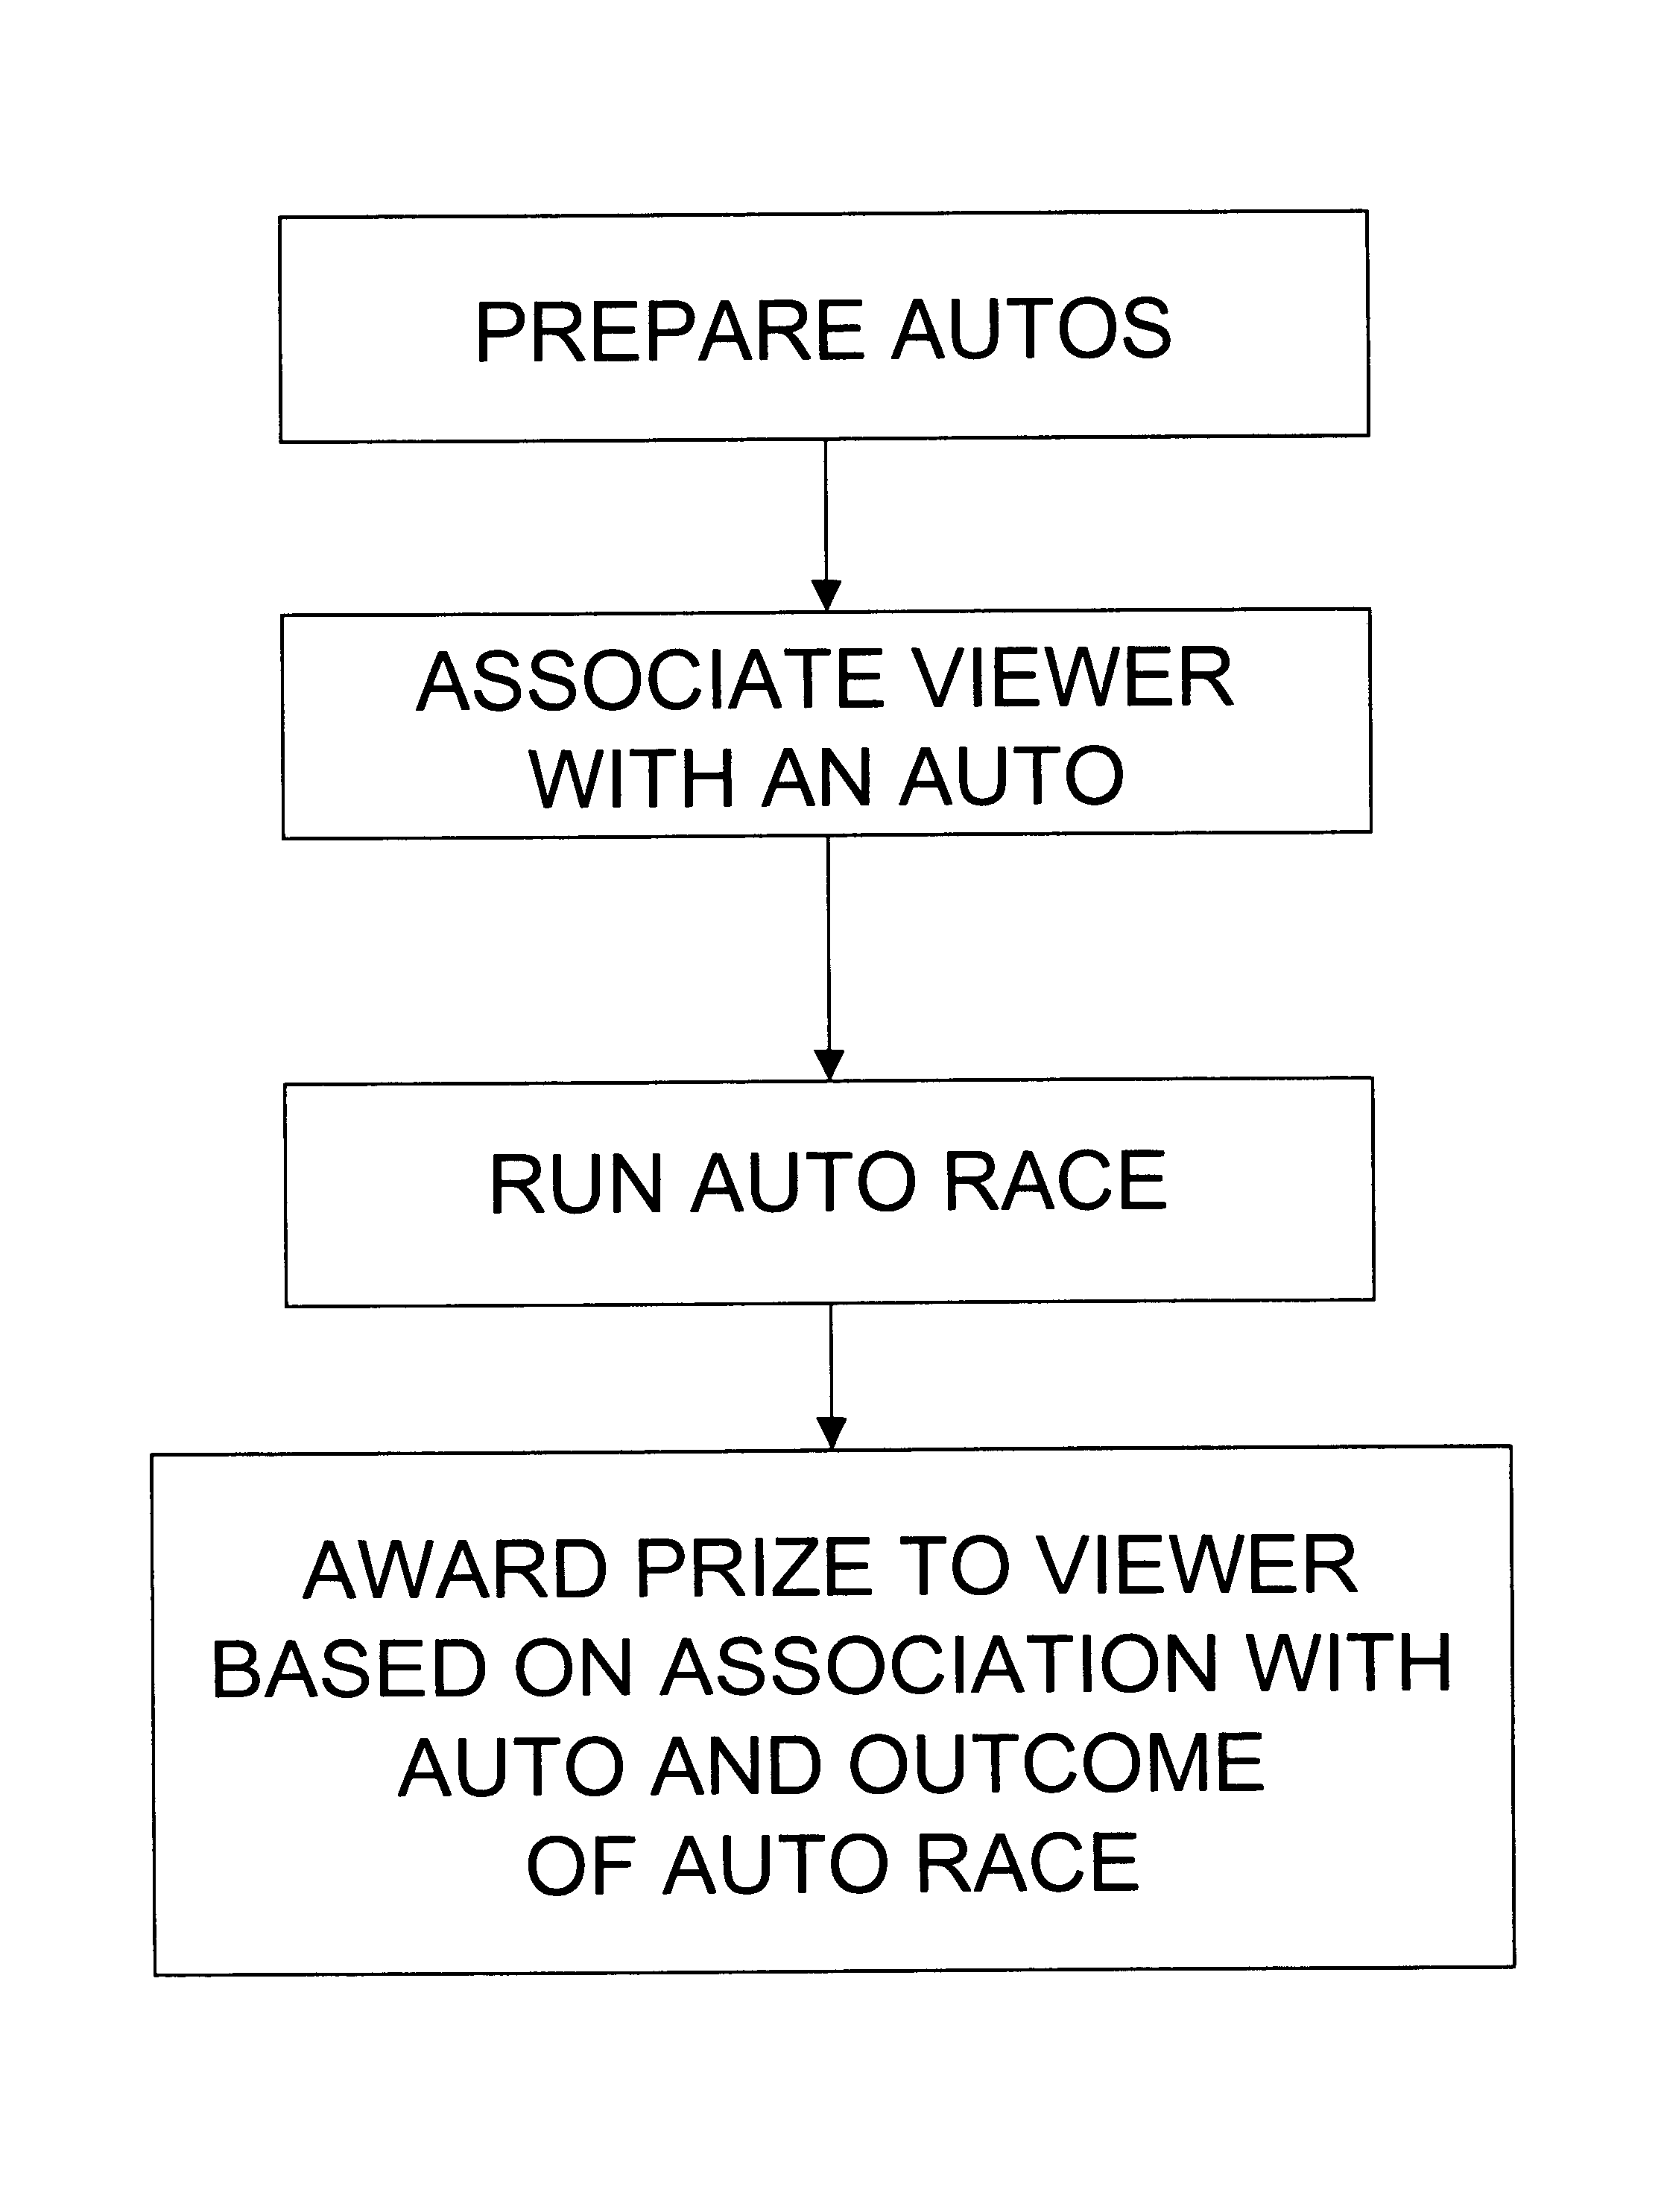 System and method for maintaining audience interest in productions, including anonymous auto race